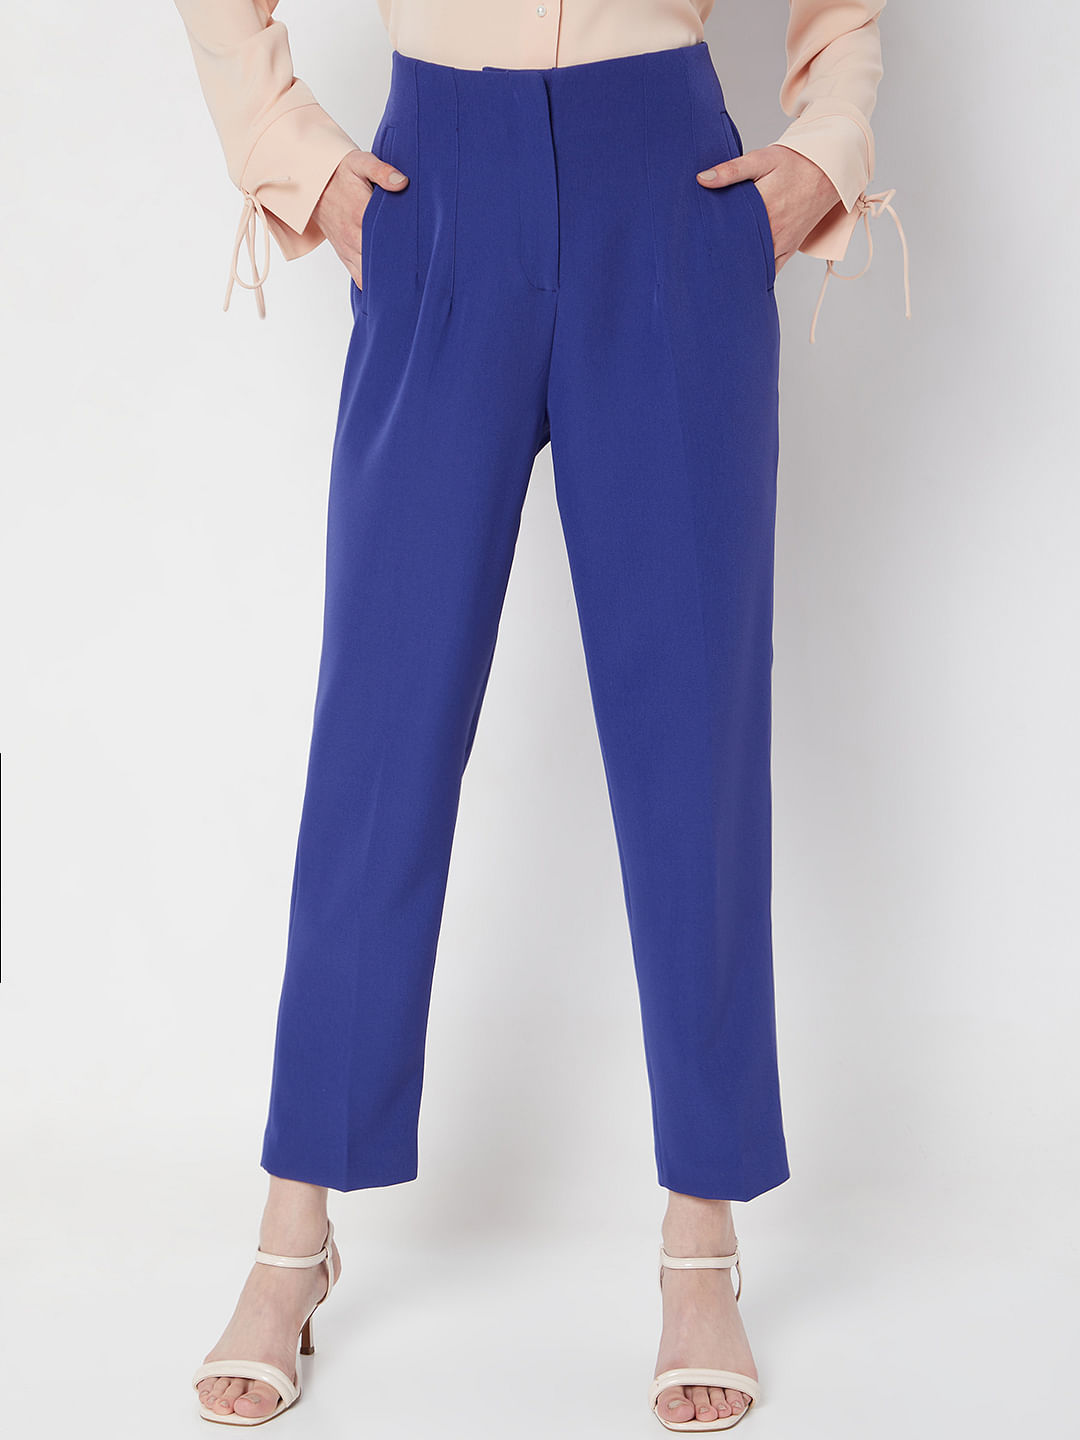 Chiclily Women Wide Leg Pants with Pockets High Waist Loose Belt Flowy  Casual Trousers, US Size Medium in Navy Blue - Walmart.com